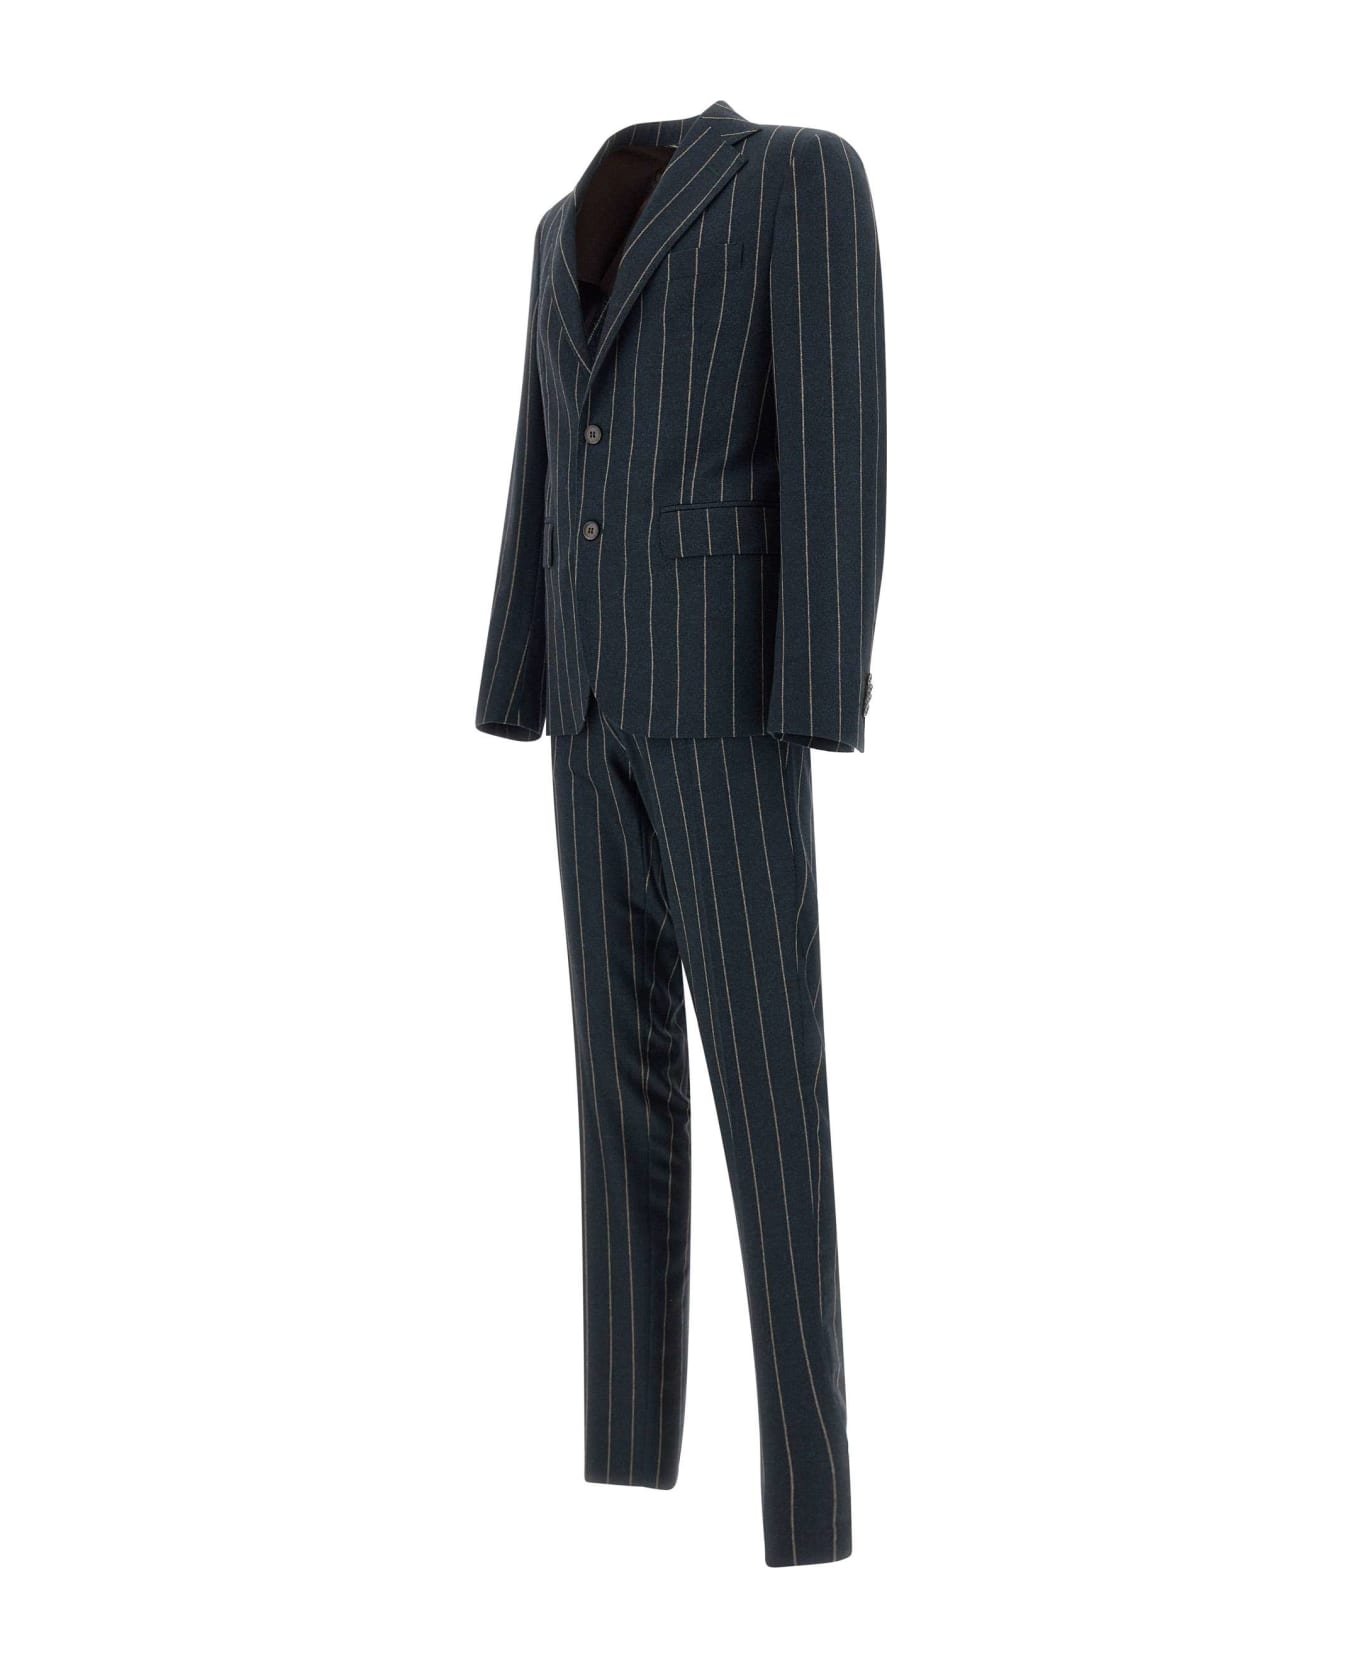 Brian Dales Wool And Cashmere Suit - BLACK